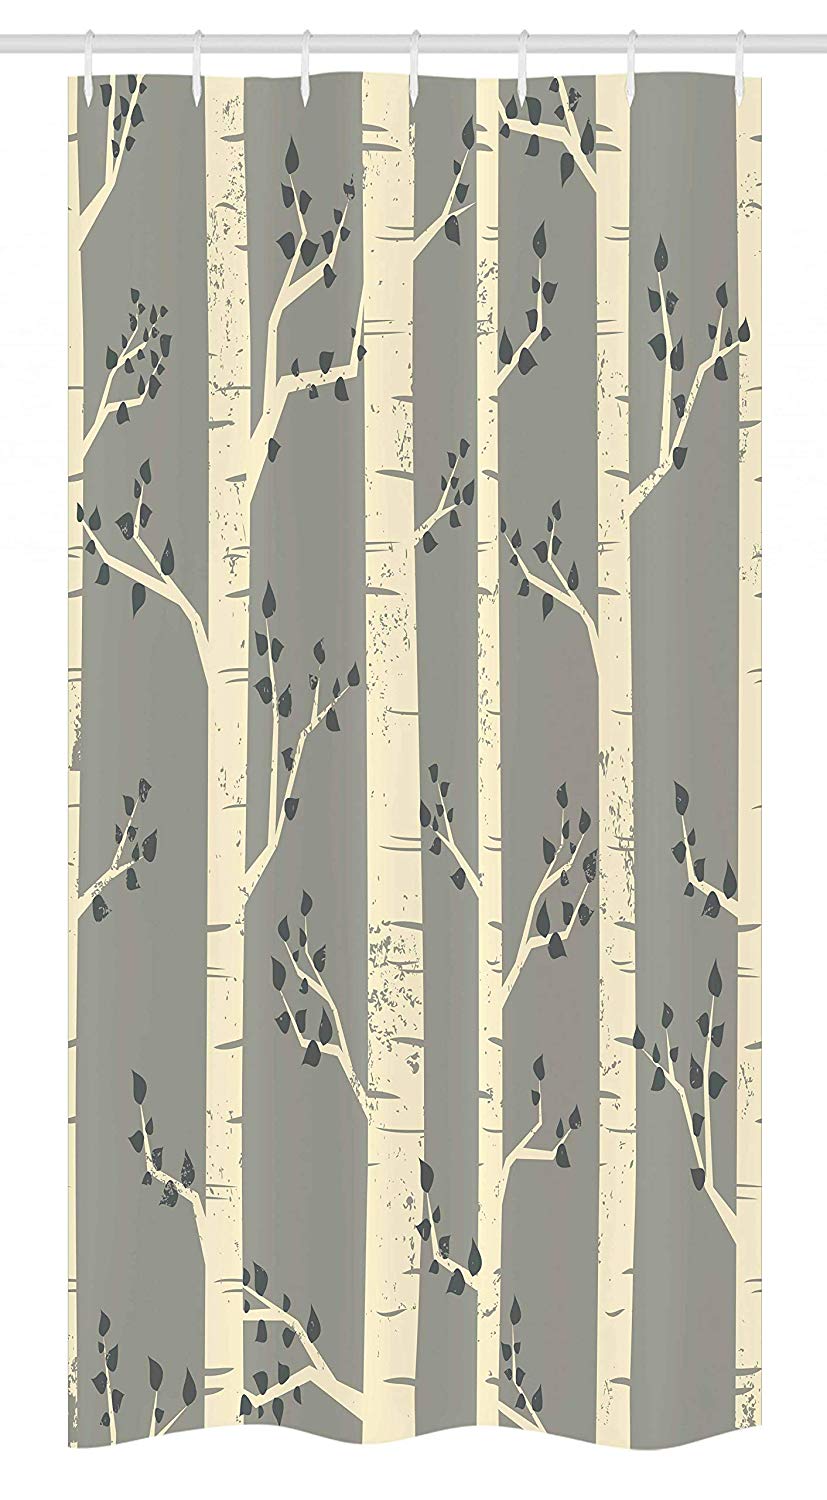 Ambesonne Grey Stall Shower Curtain, Birch Tree Branches Vintage Bohemian Contemporary Illustration of Nature, Fabric Bathroom Decor Set with Hooks, 36" X 72", Warm Taupe